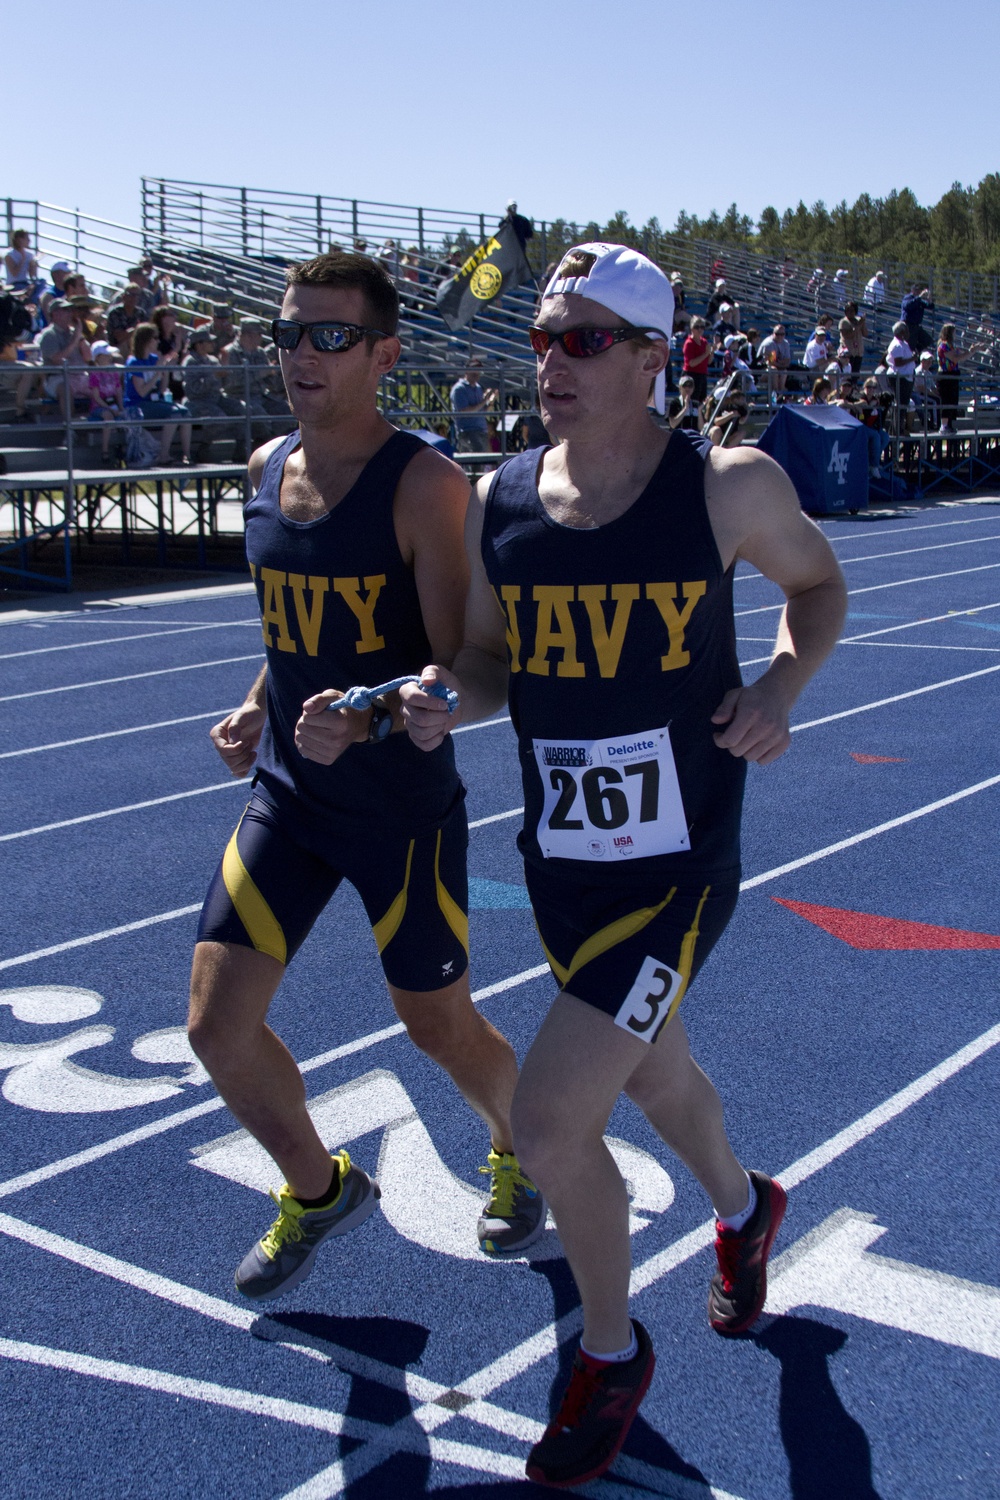 Team Navy/Coast Guard excels at track events at Warrior Games